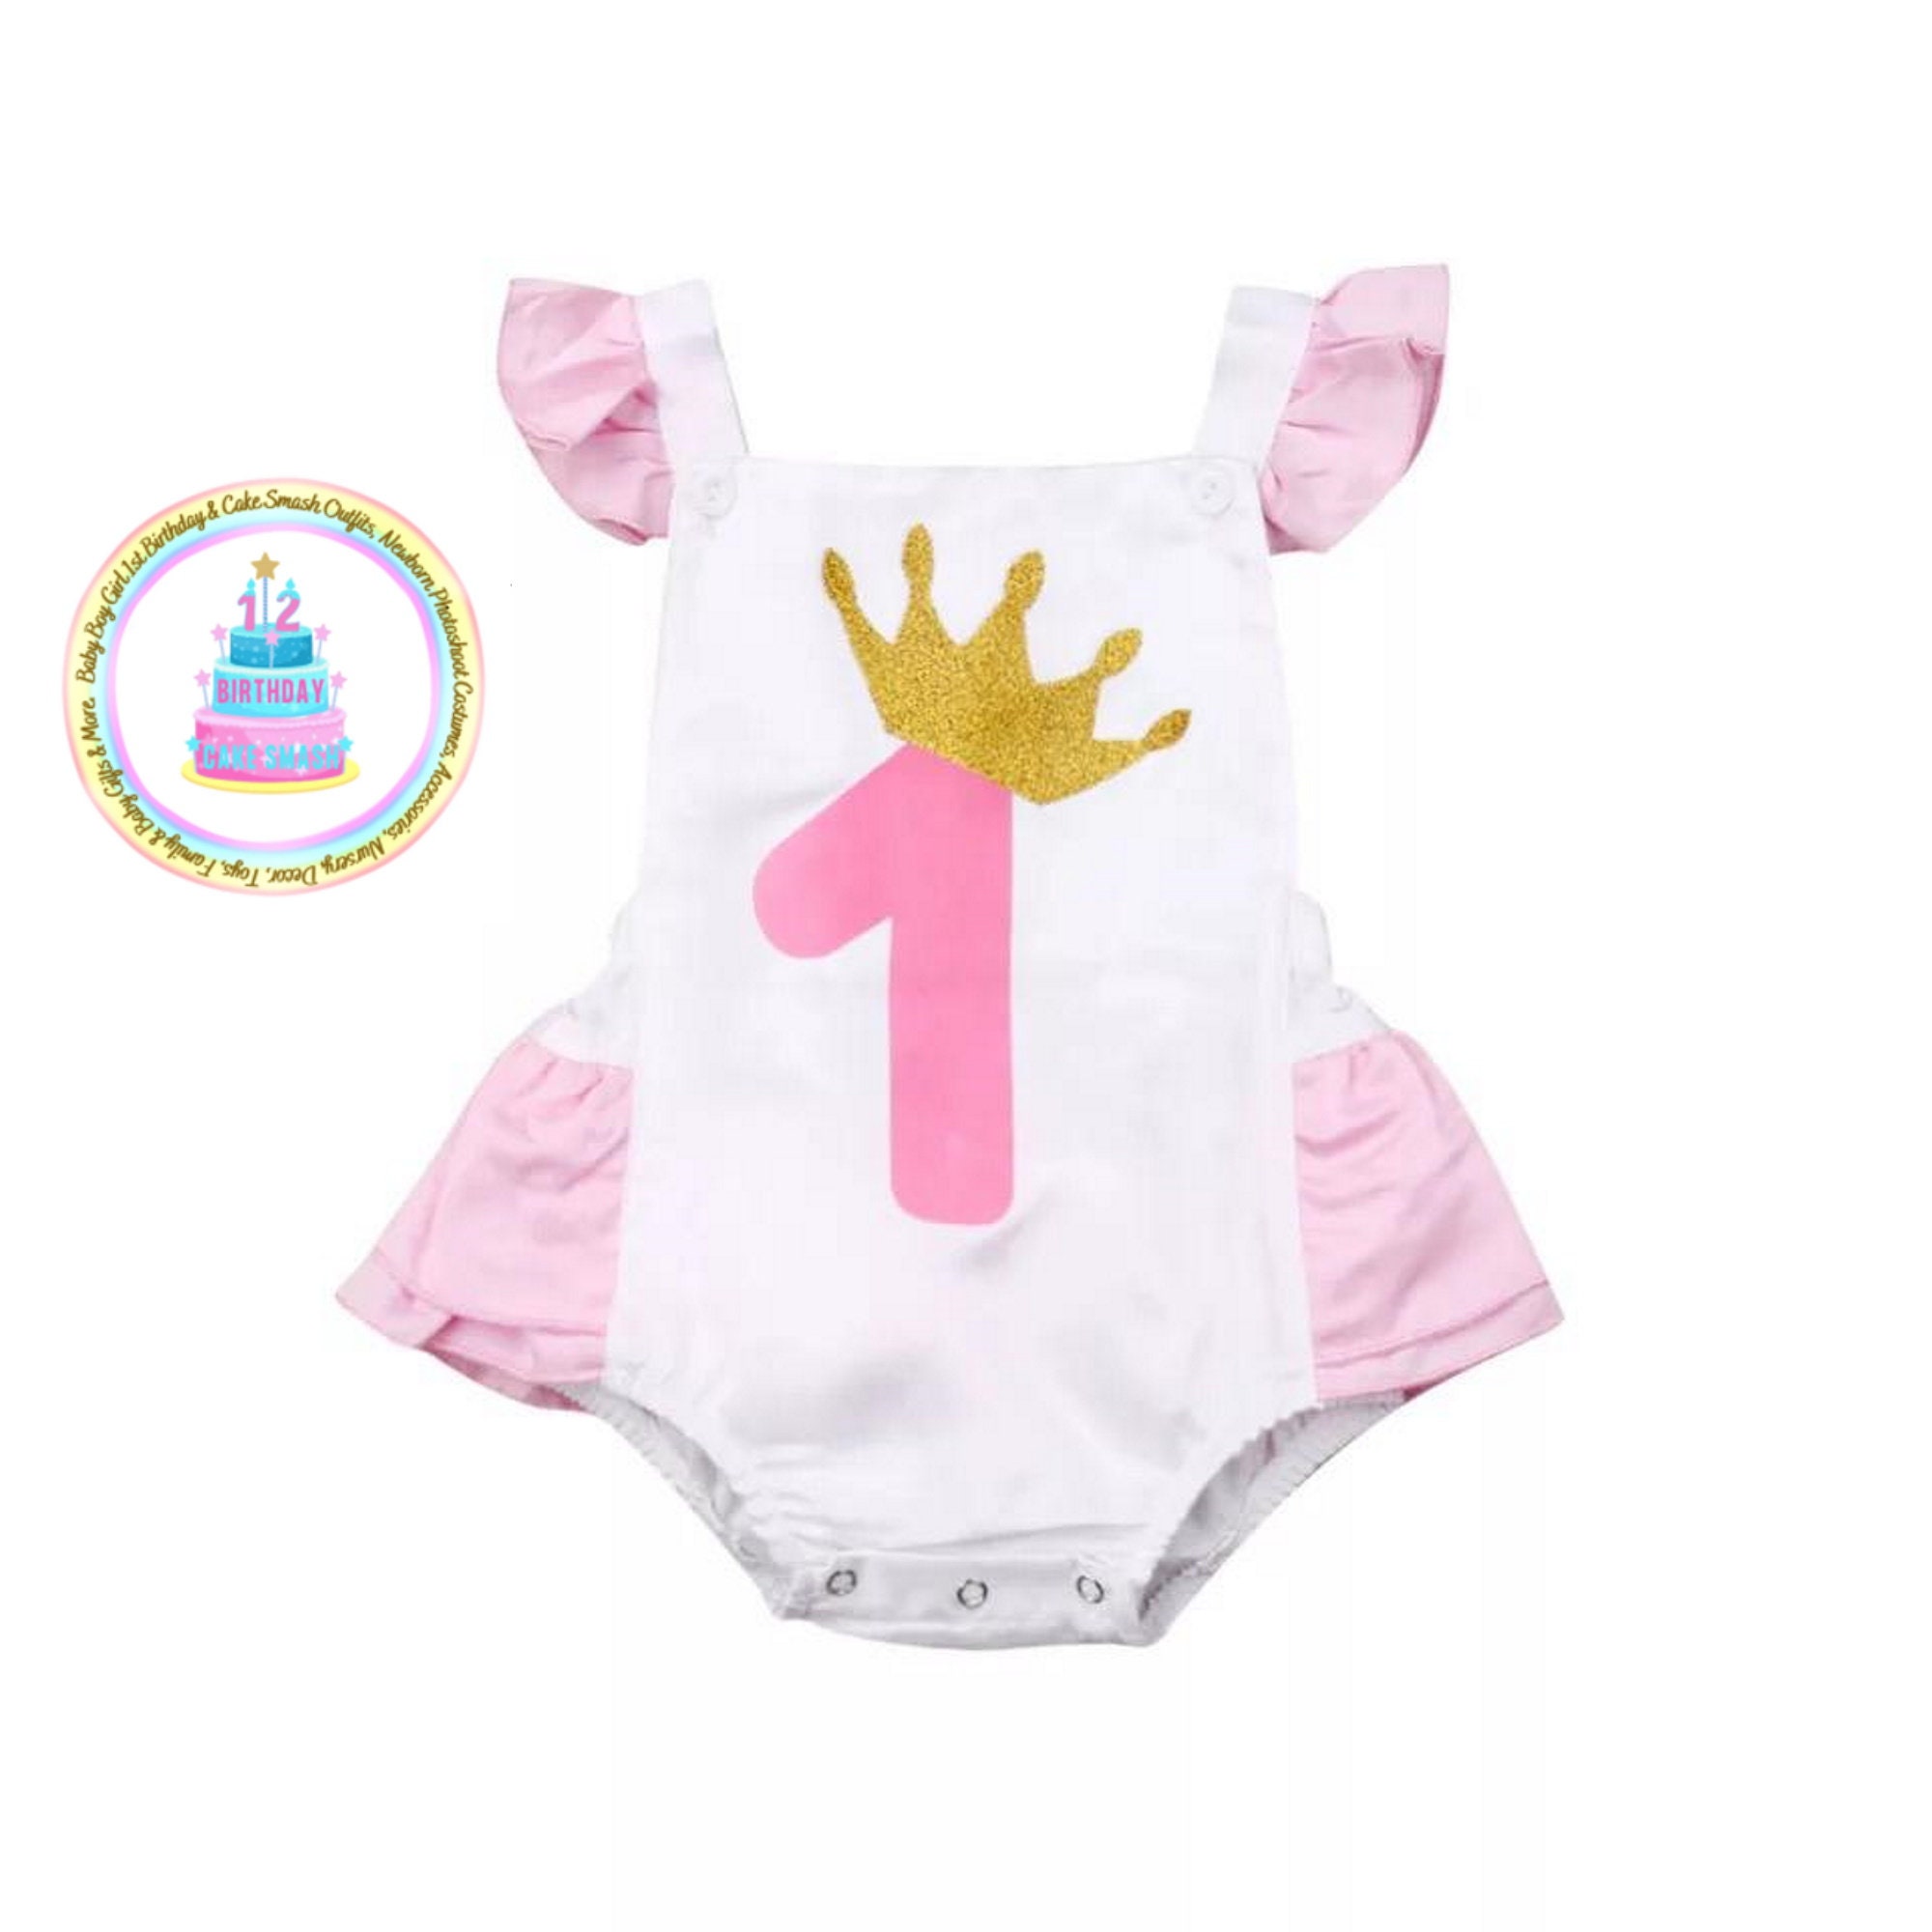 Xiaoluokaixin Newborn Baby Boy Girl Jumpsuit Ribbed Short Sleeve Romper Bodysuit Solid Knitted One Piece Outfits Clothes 